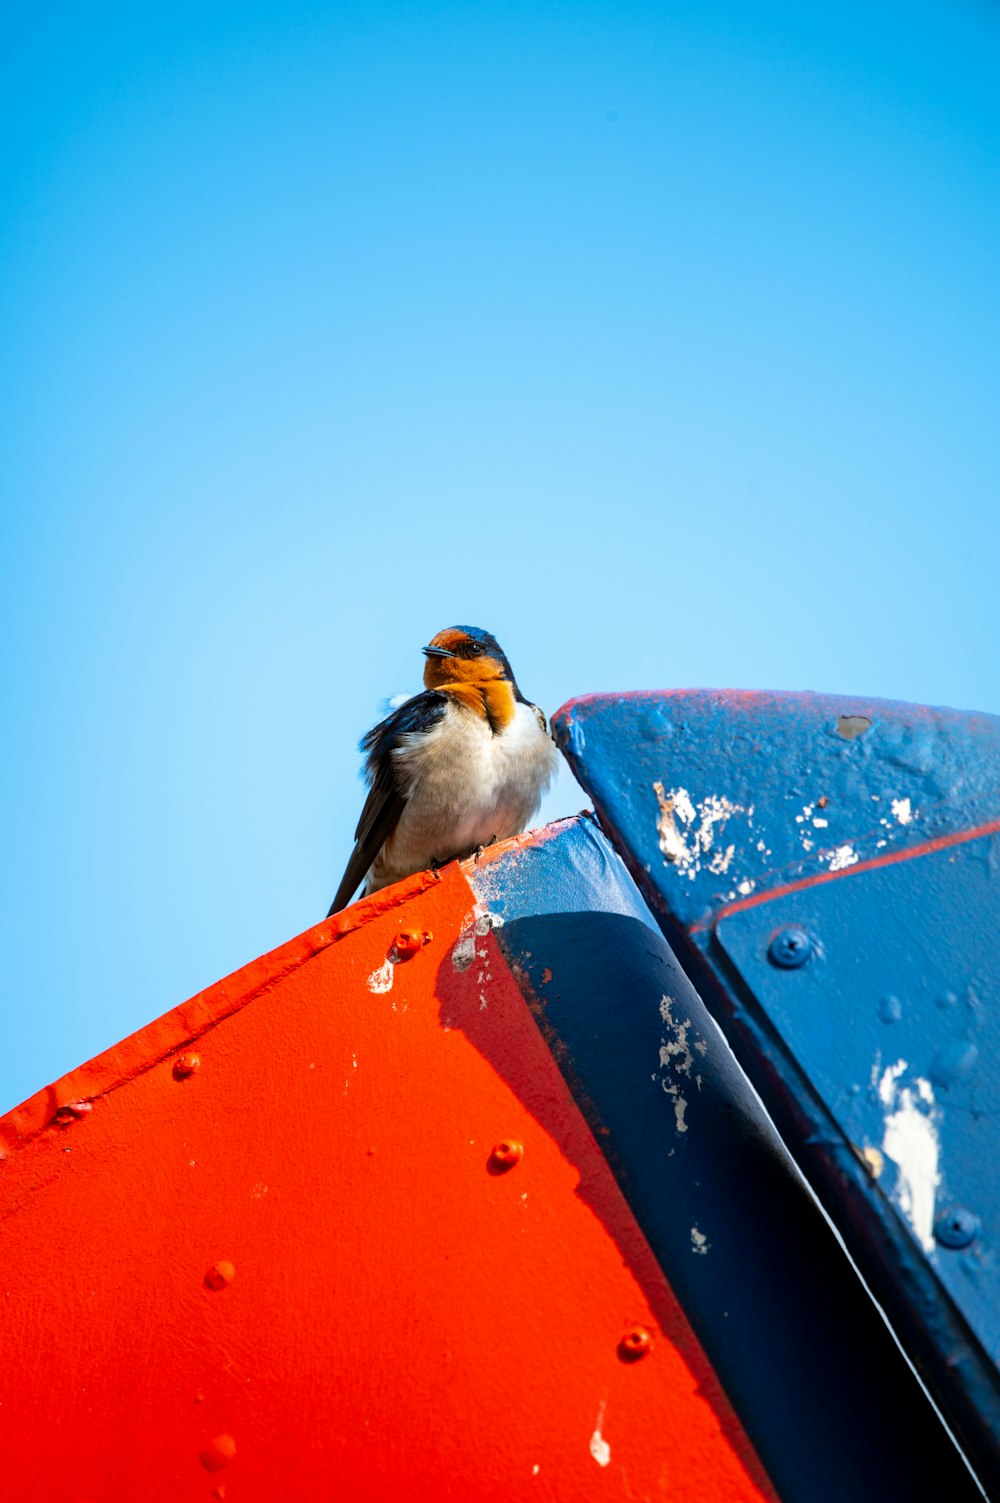 a small bird perched on top of a red and blue object